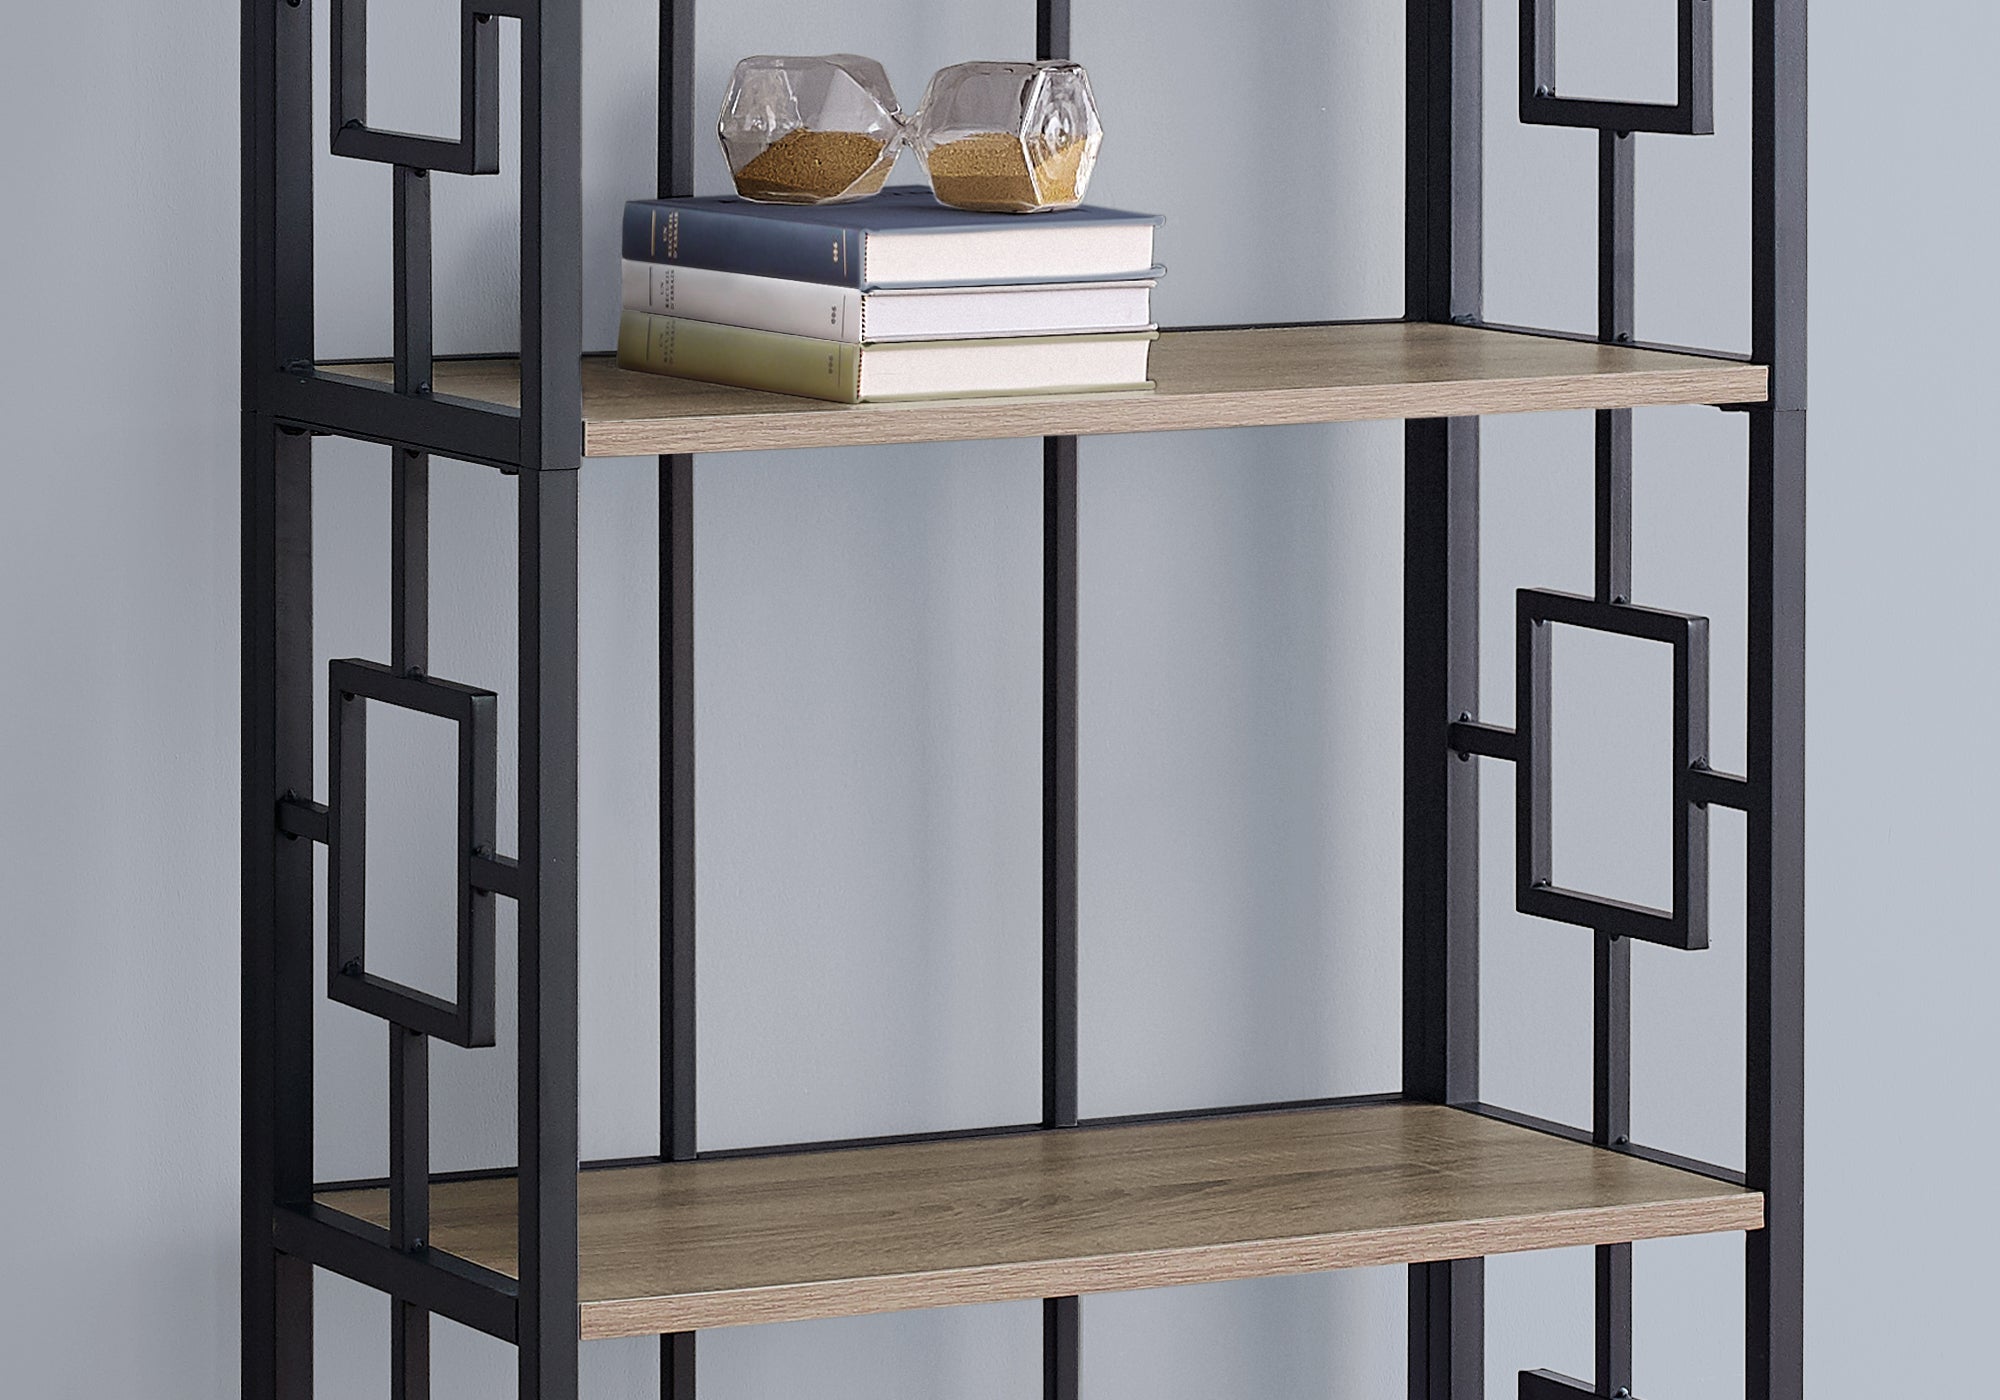 I 3616 - BOOKCASE - 62"H / DARK TAUPE / BLACK METAL ETAGERE BYMONARCH SPECIALTIES INC